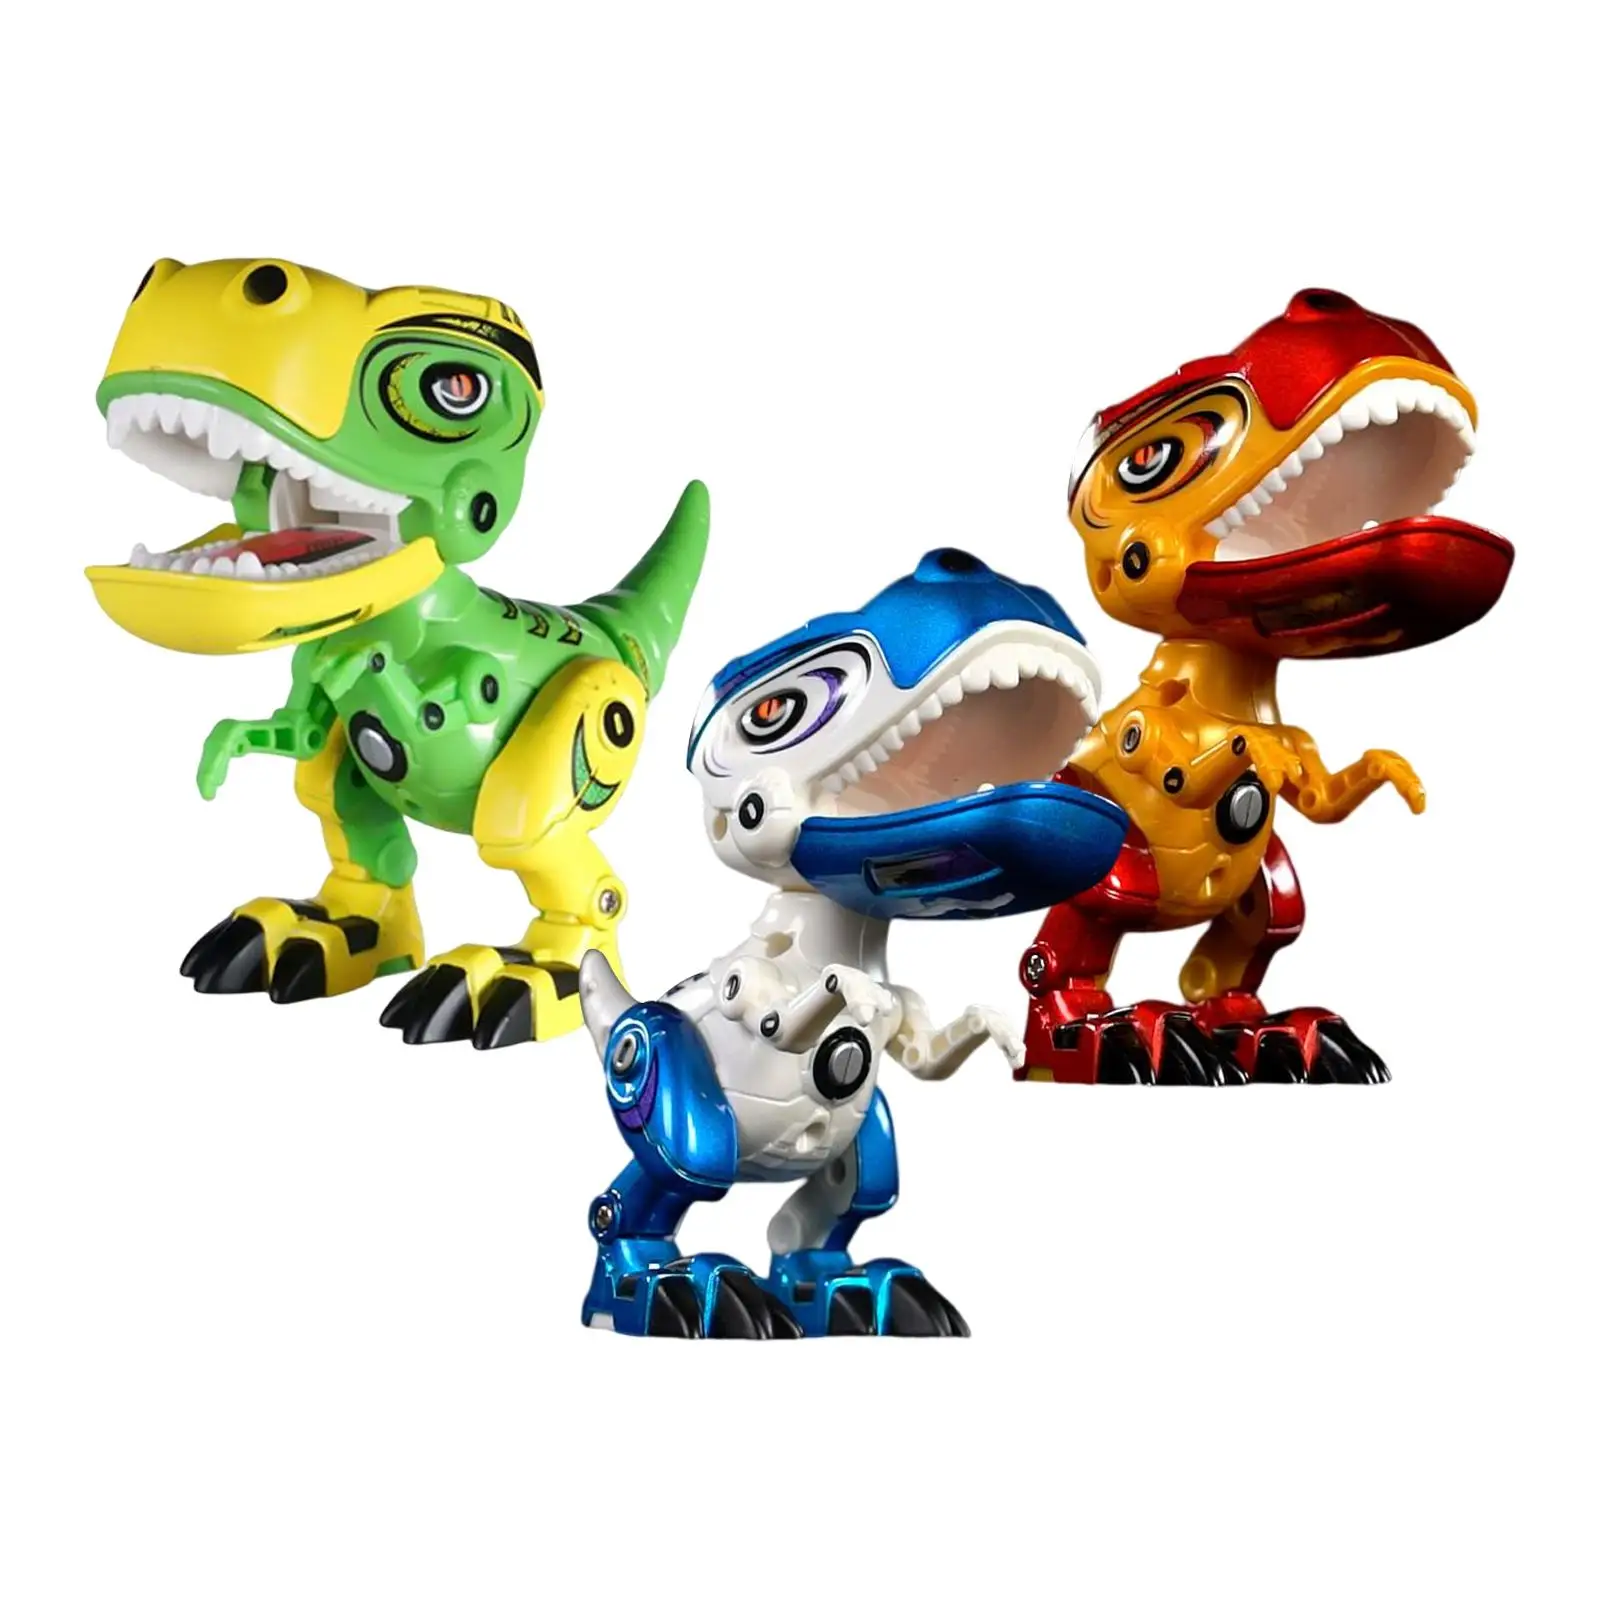 Electric Dinosaur Animals Toy Dinosaur Action Toy Early Learning Education Toy with Sound and Light for Toddlers Kids Children